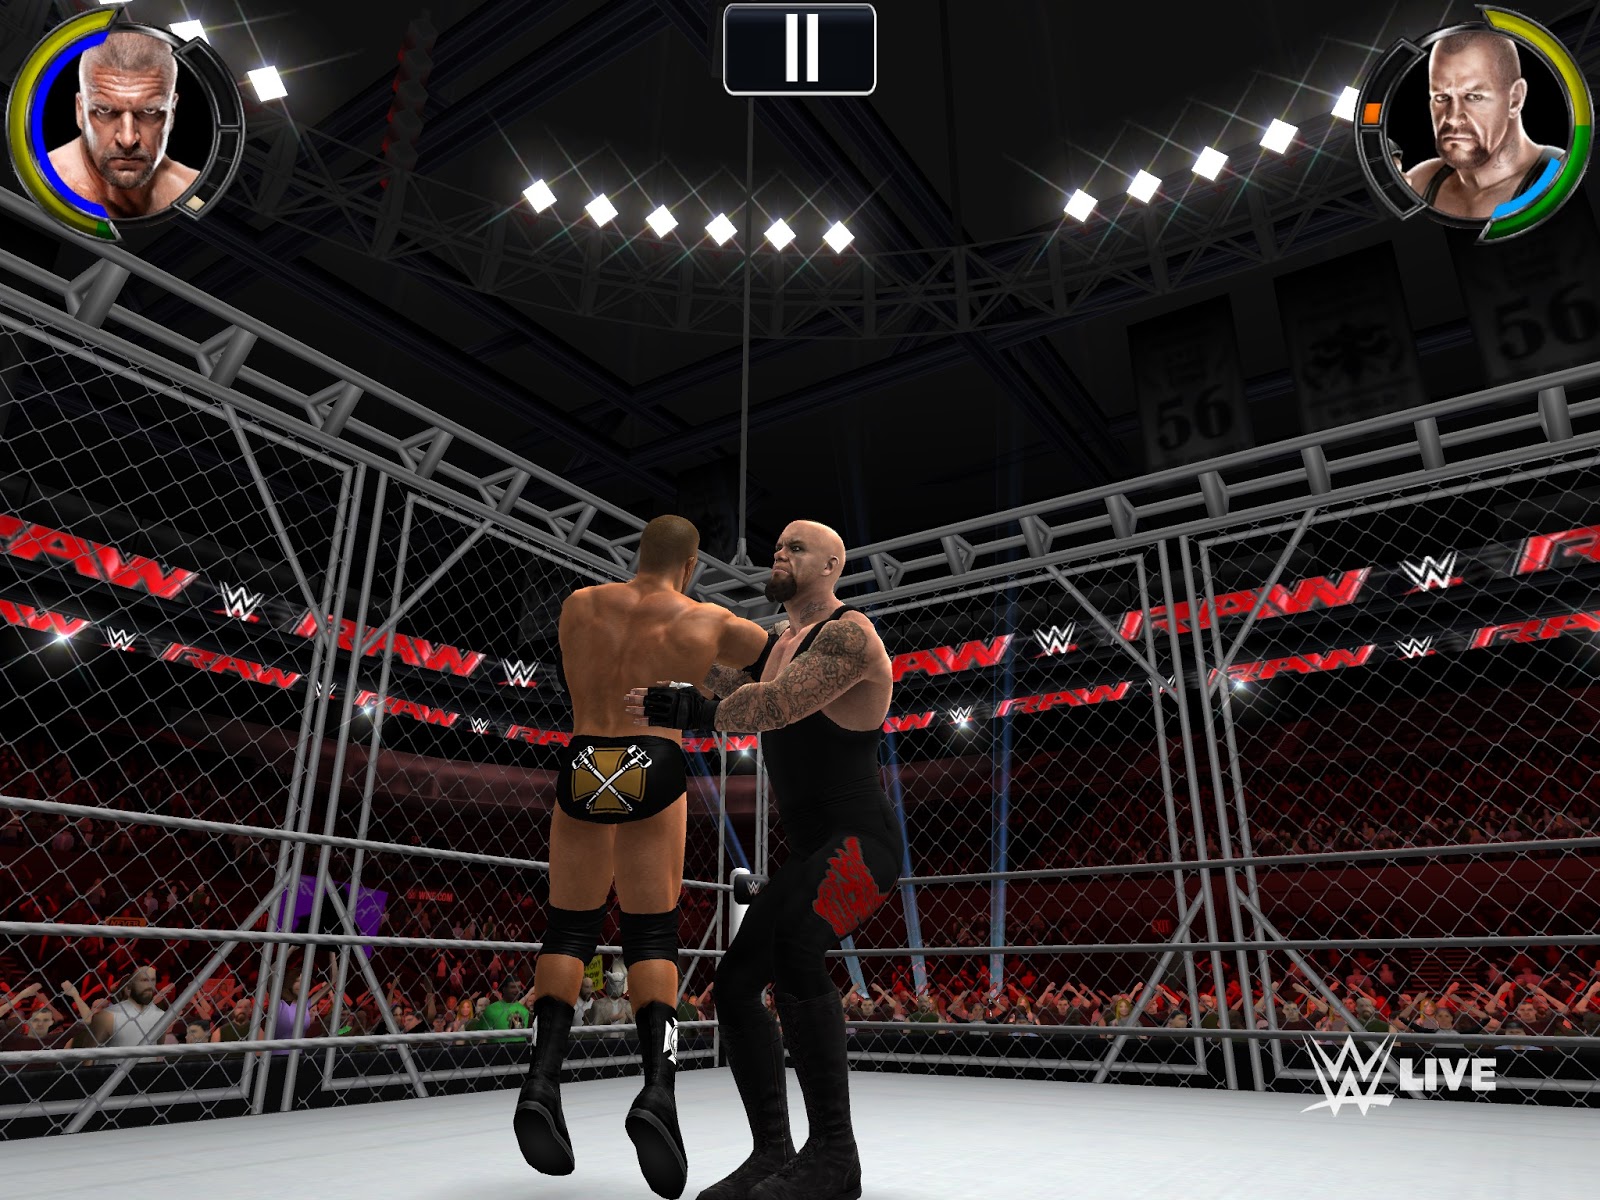 Wwe 2k game download for android file